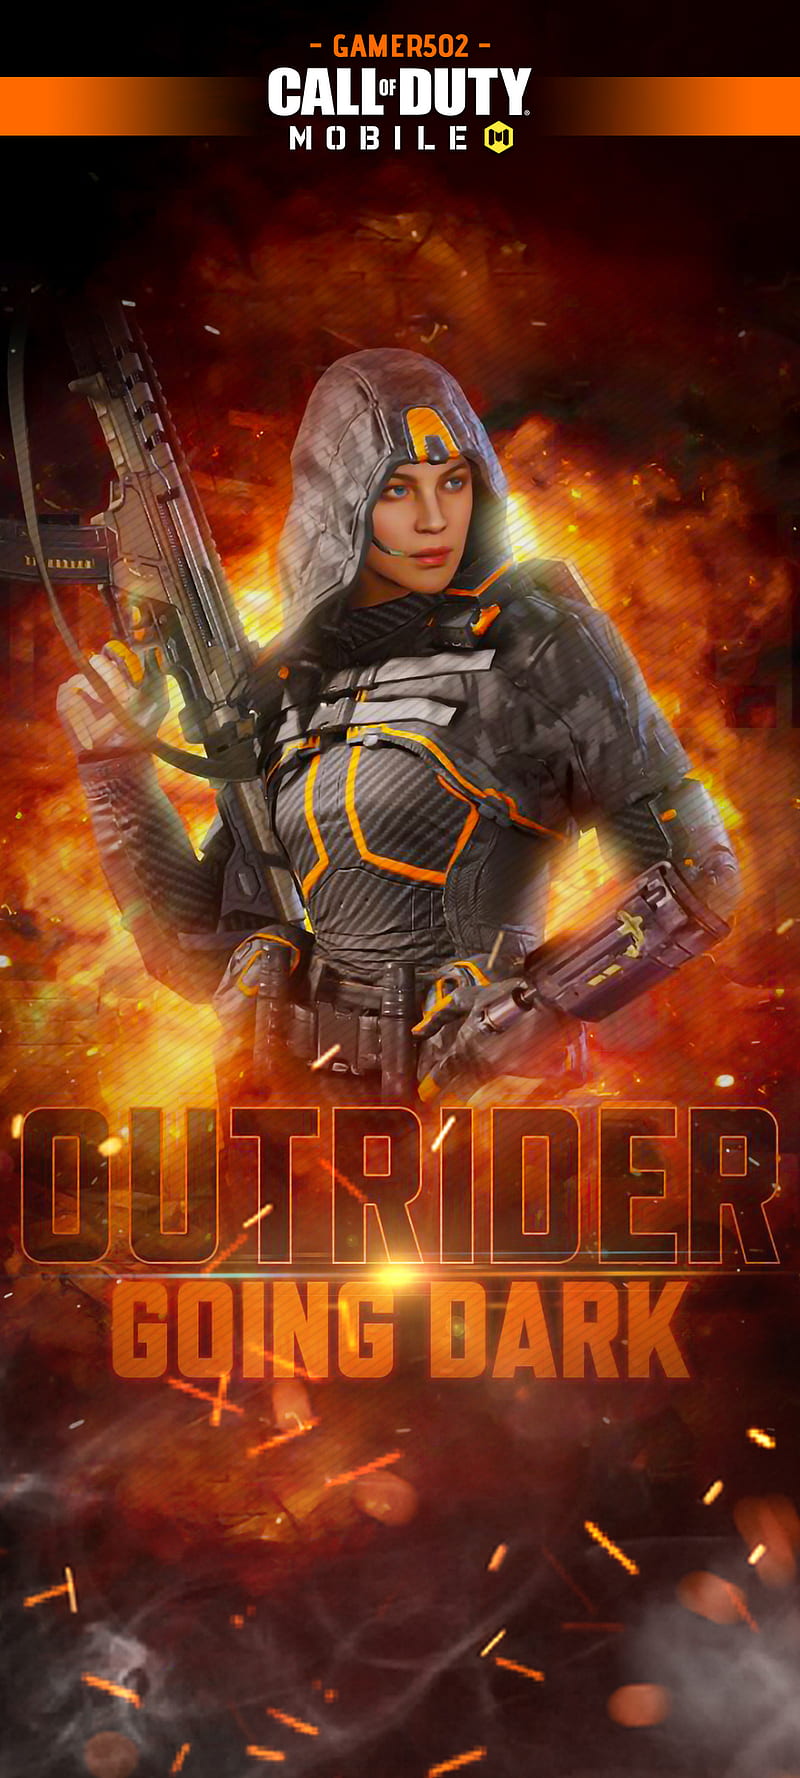 Outraider Going Dark, call of duty mobile, codm, codmobile, fondos codm, outrider, outrider going dark, codm, codmobile, HD phone wallpaper